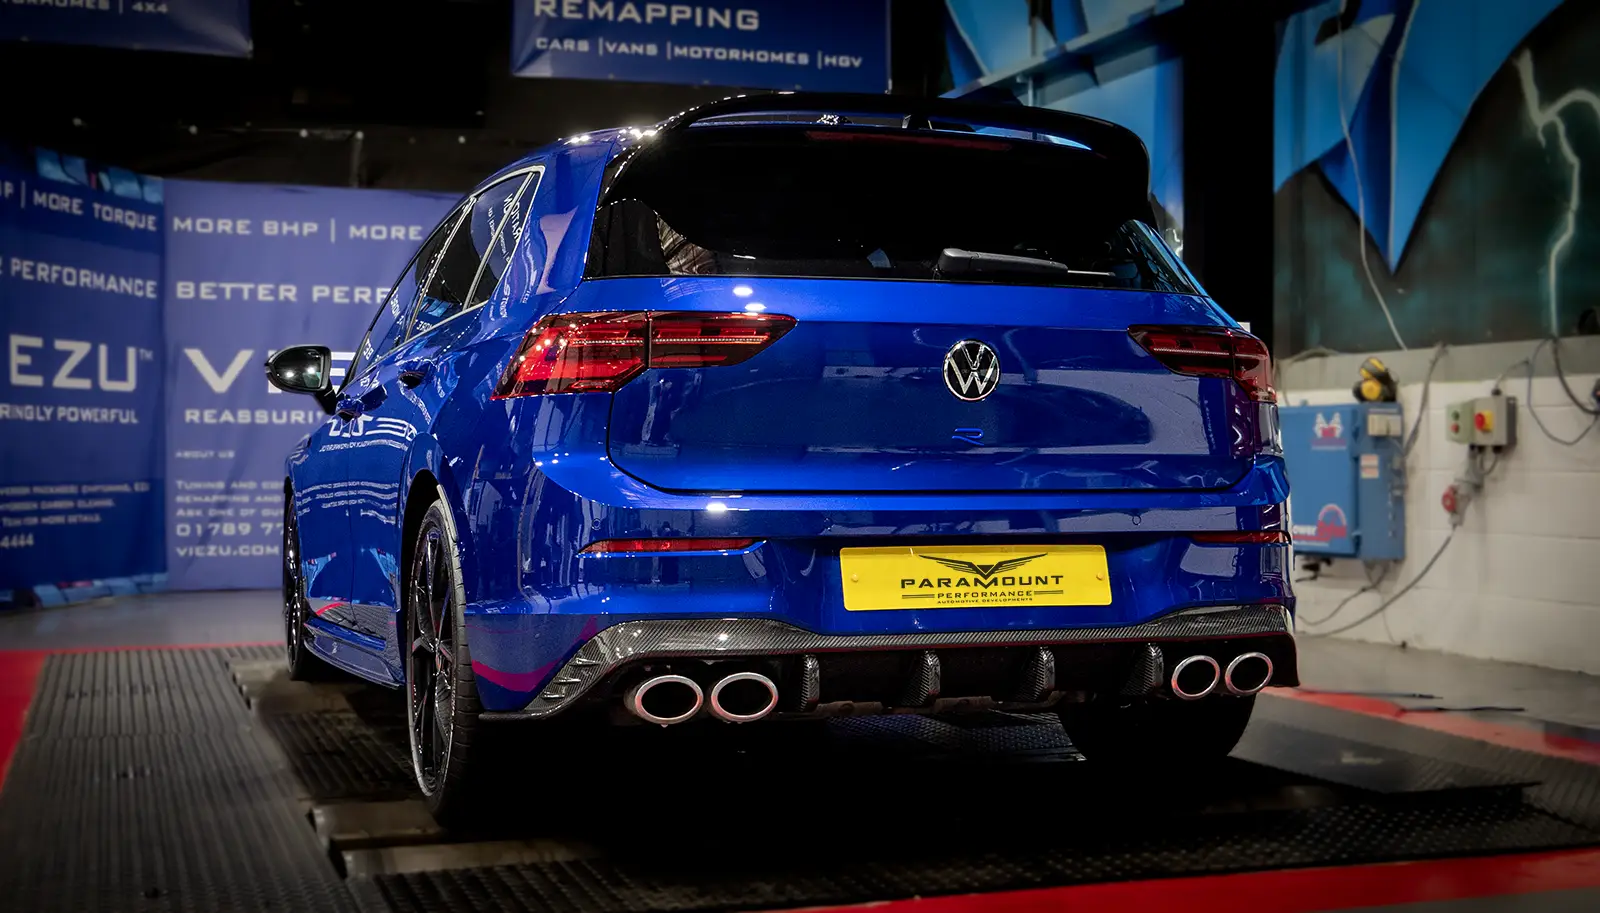 VW Golf R Mk8 Tuning Remapping and upgrades., VW Golf R Mk8 Tuning Remapping and Upgrades.